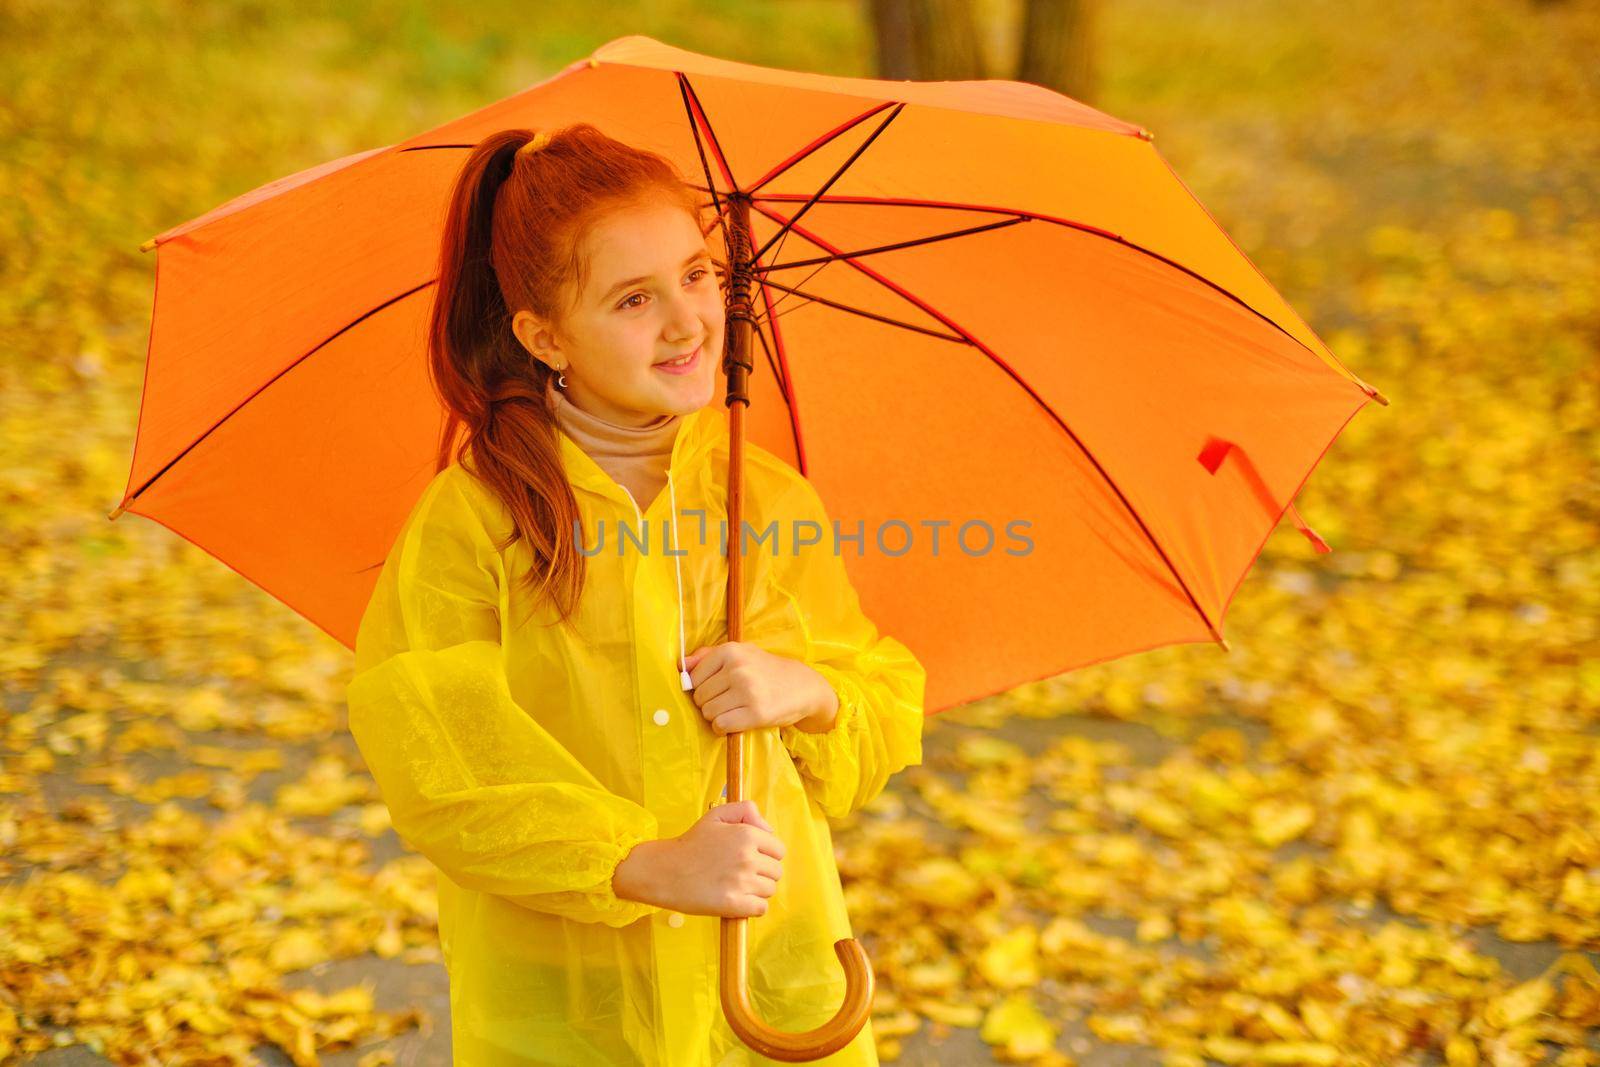 Happy child in the rain. Funny kid playing outdoors and catching rain drops in Autumn park